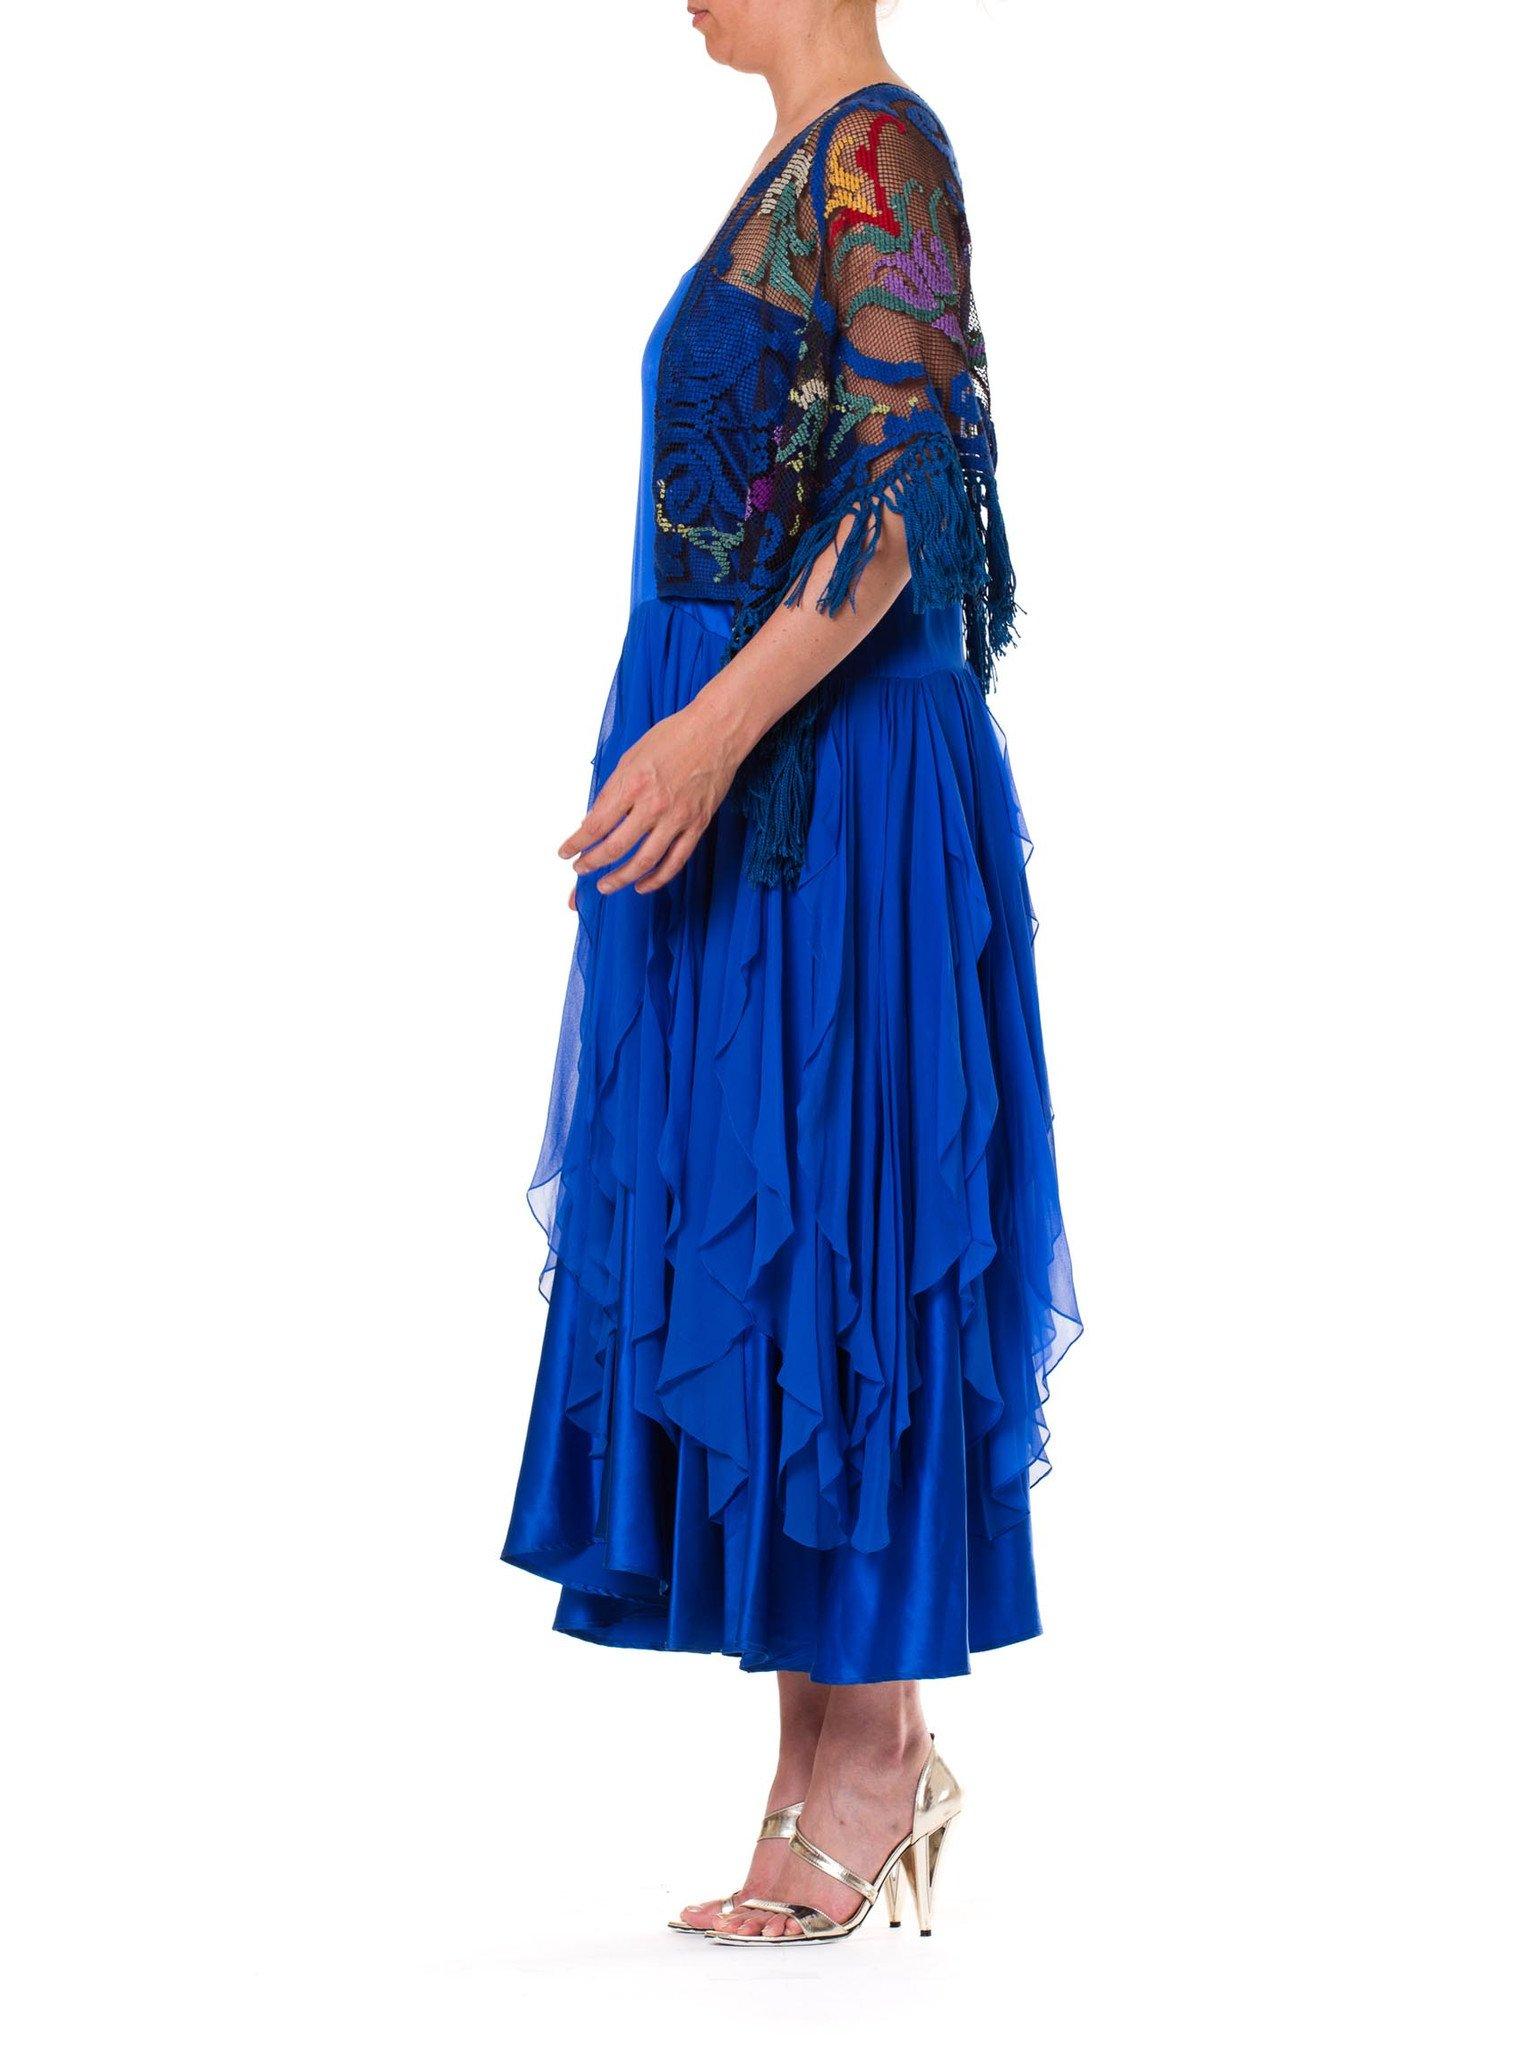 Women's Blue Silk Charmeuse  & Chiffon Dress With Antique Lace Sleeves For Sale